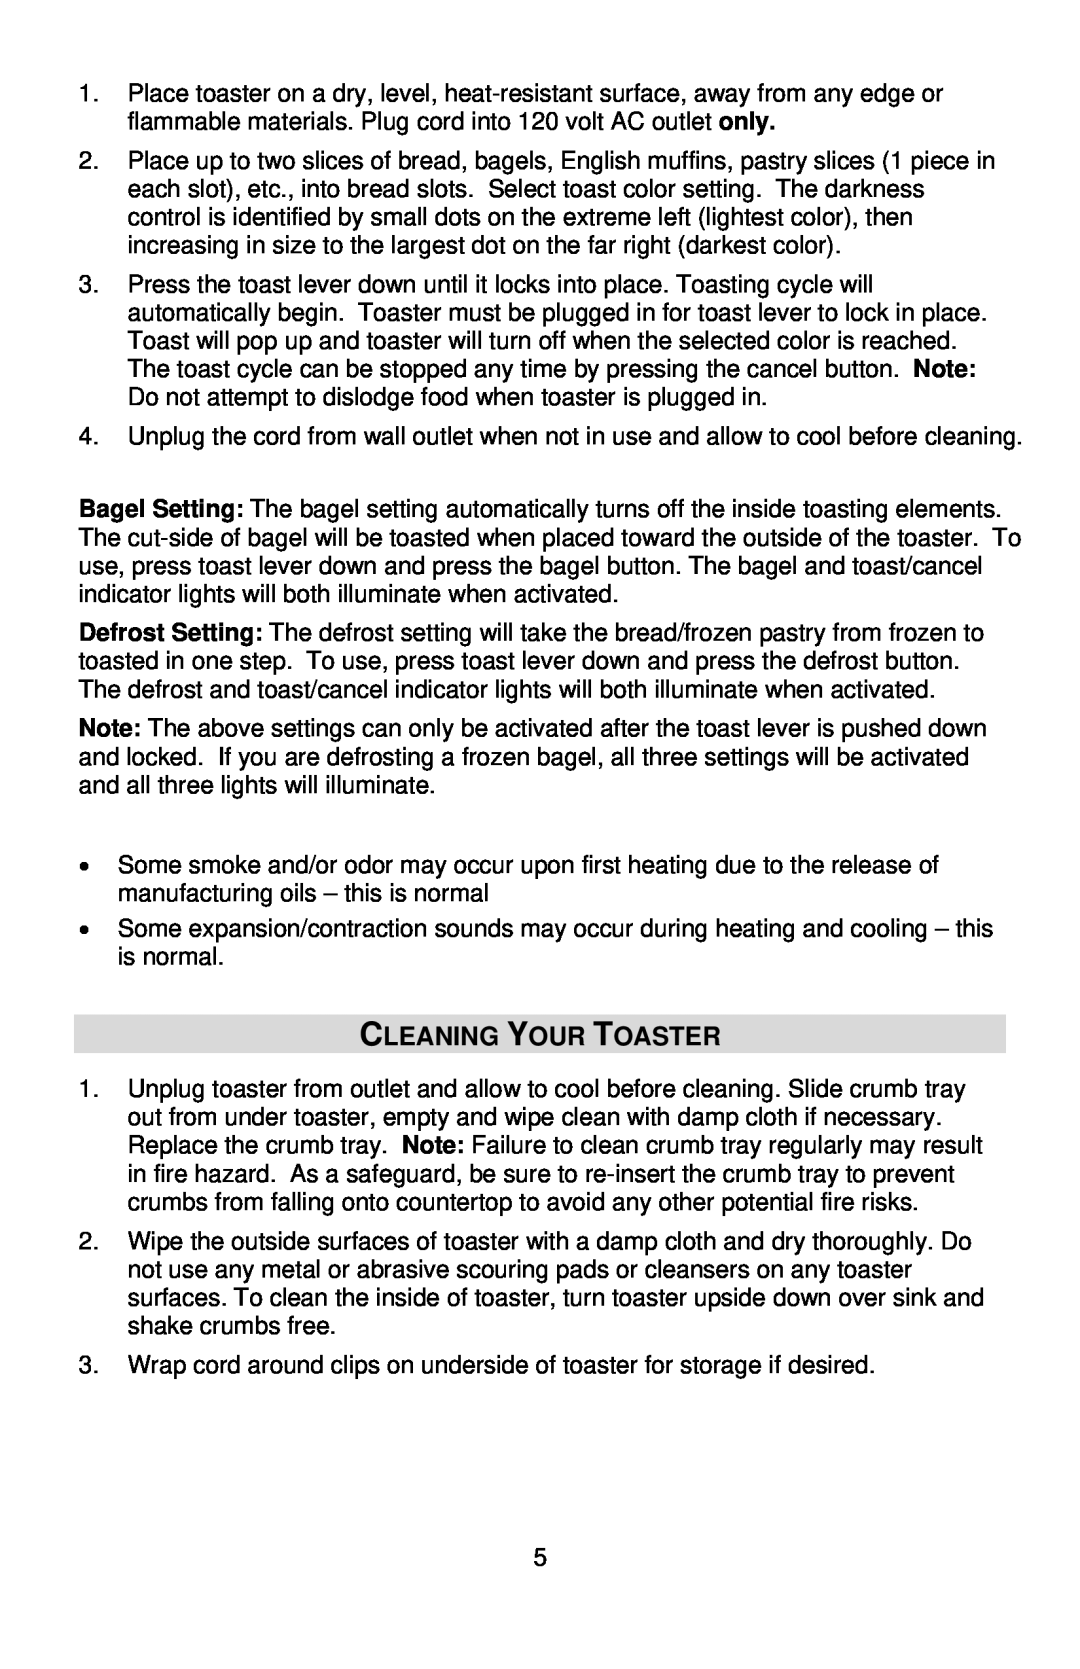 West Bend Studio Toaster instruction manual Cleaning Your Toaster 